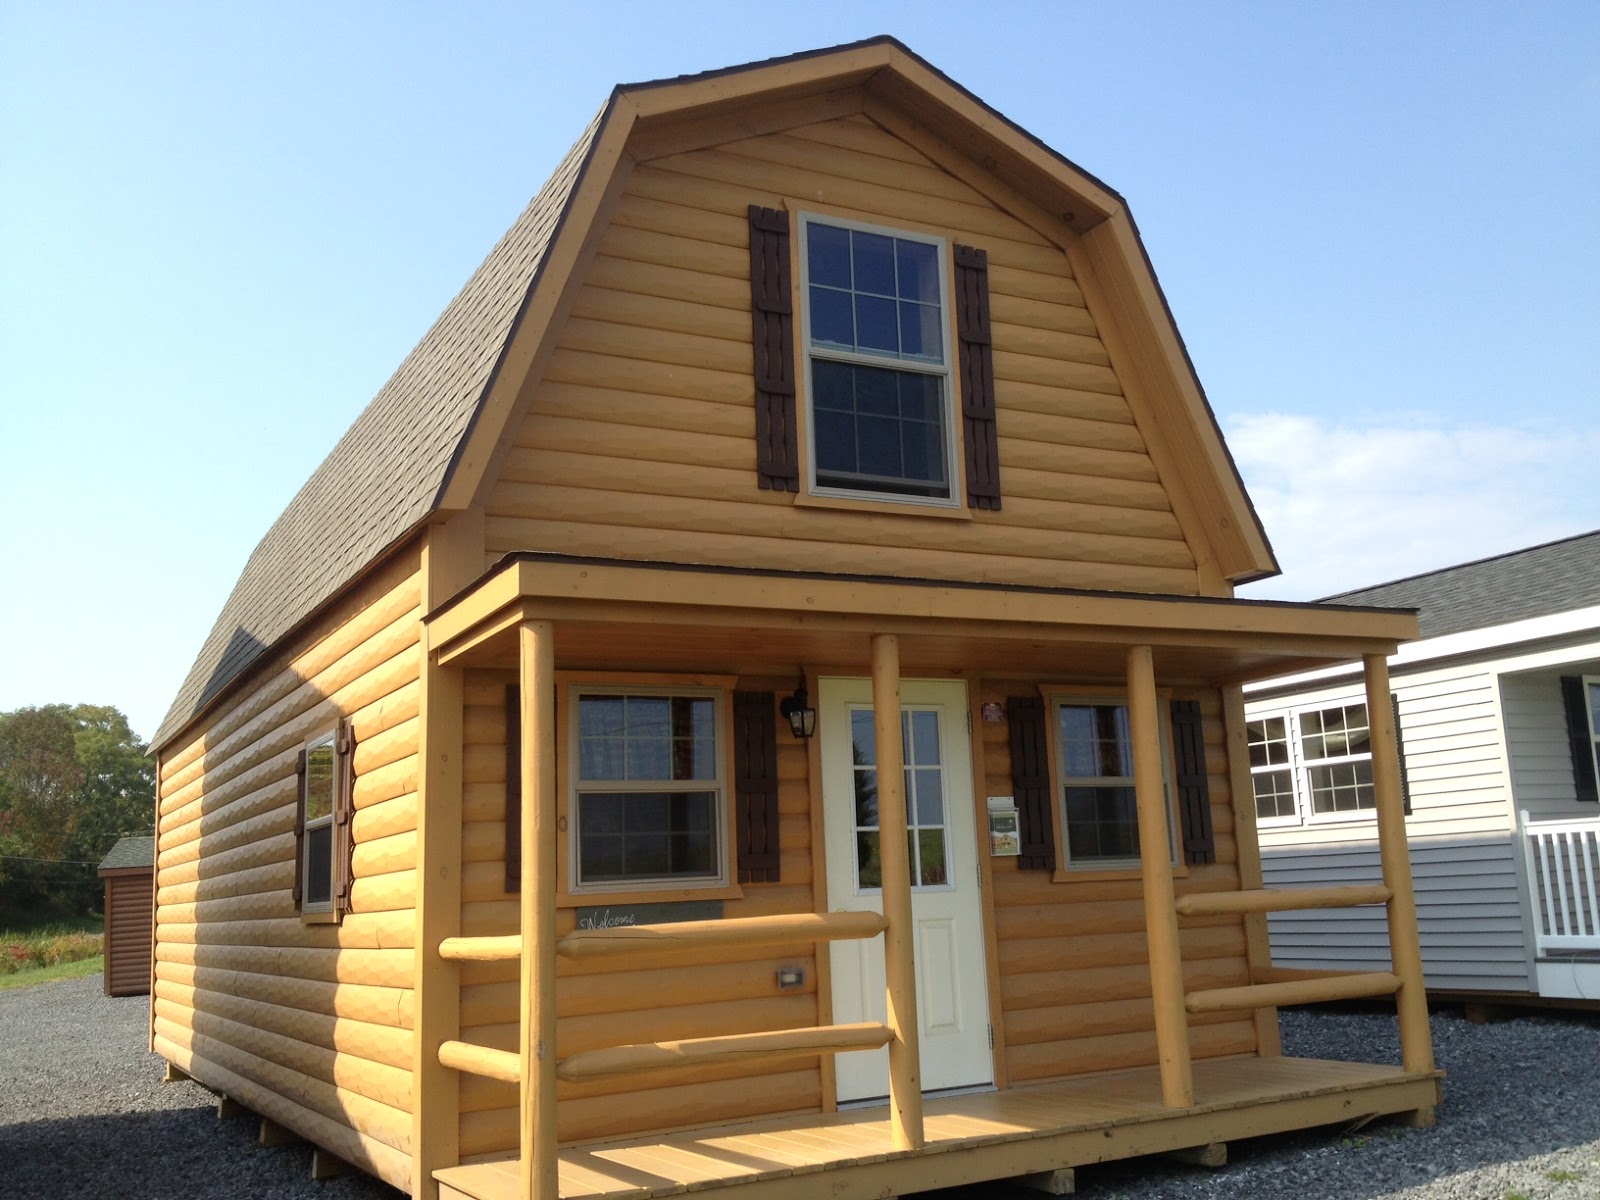 Small Scale Homes: Wood-Tex 768 Square Foot Prefab. Cabin